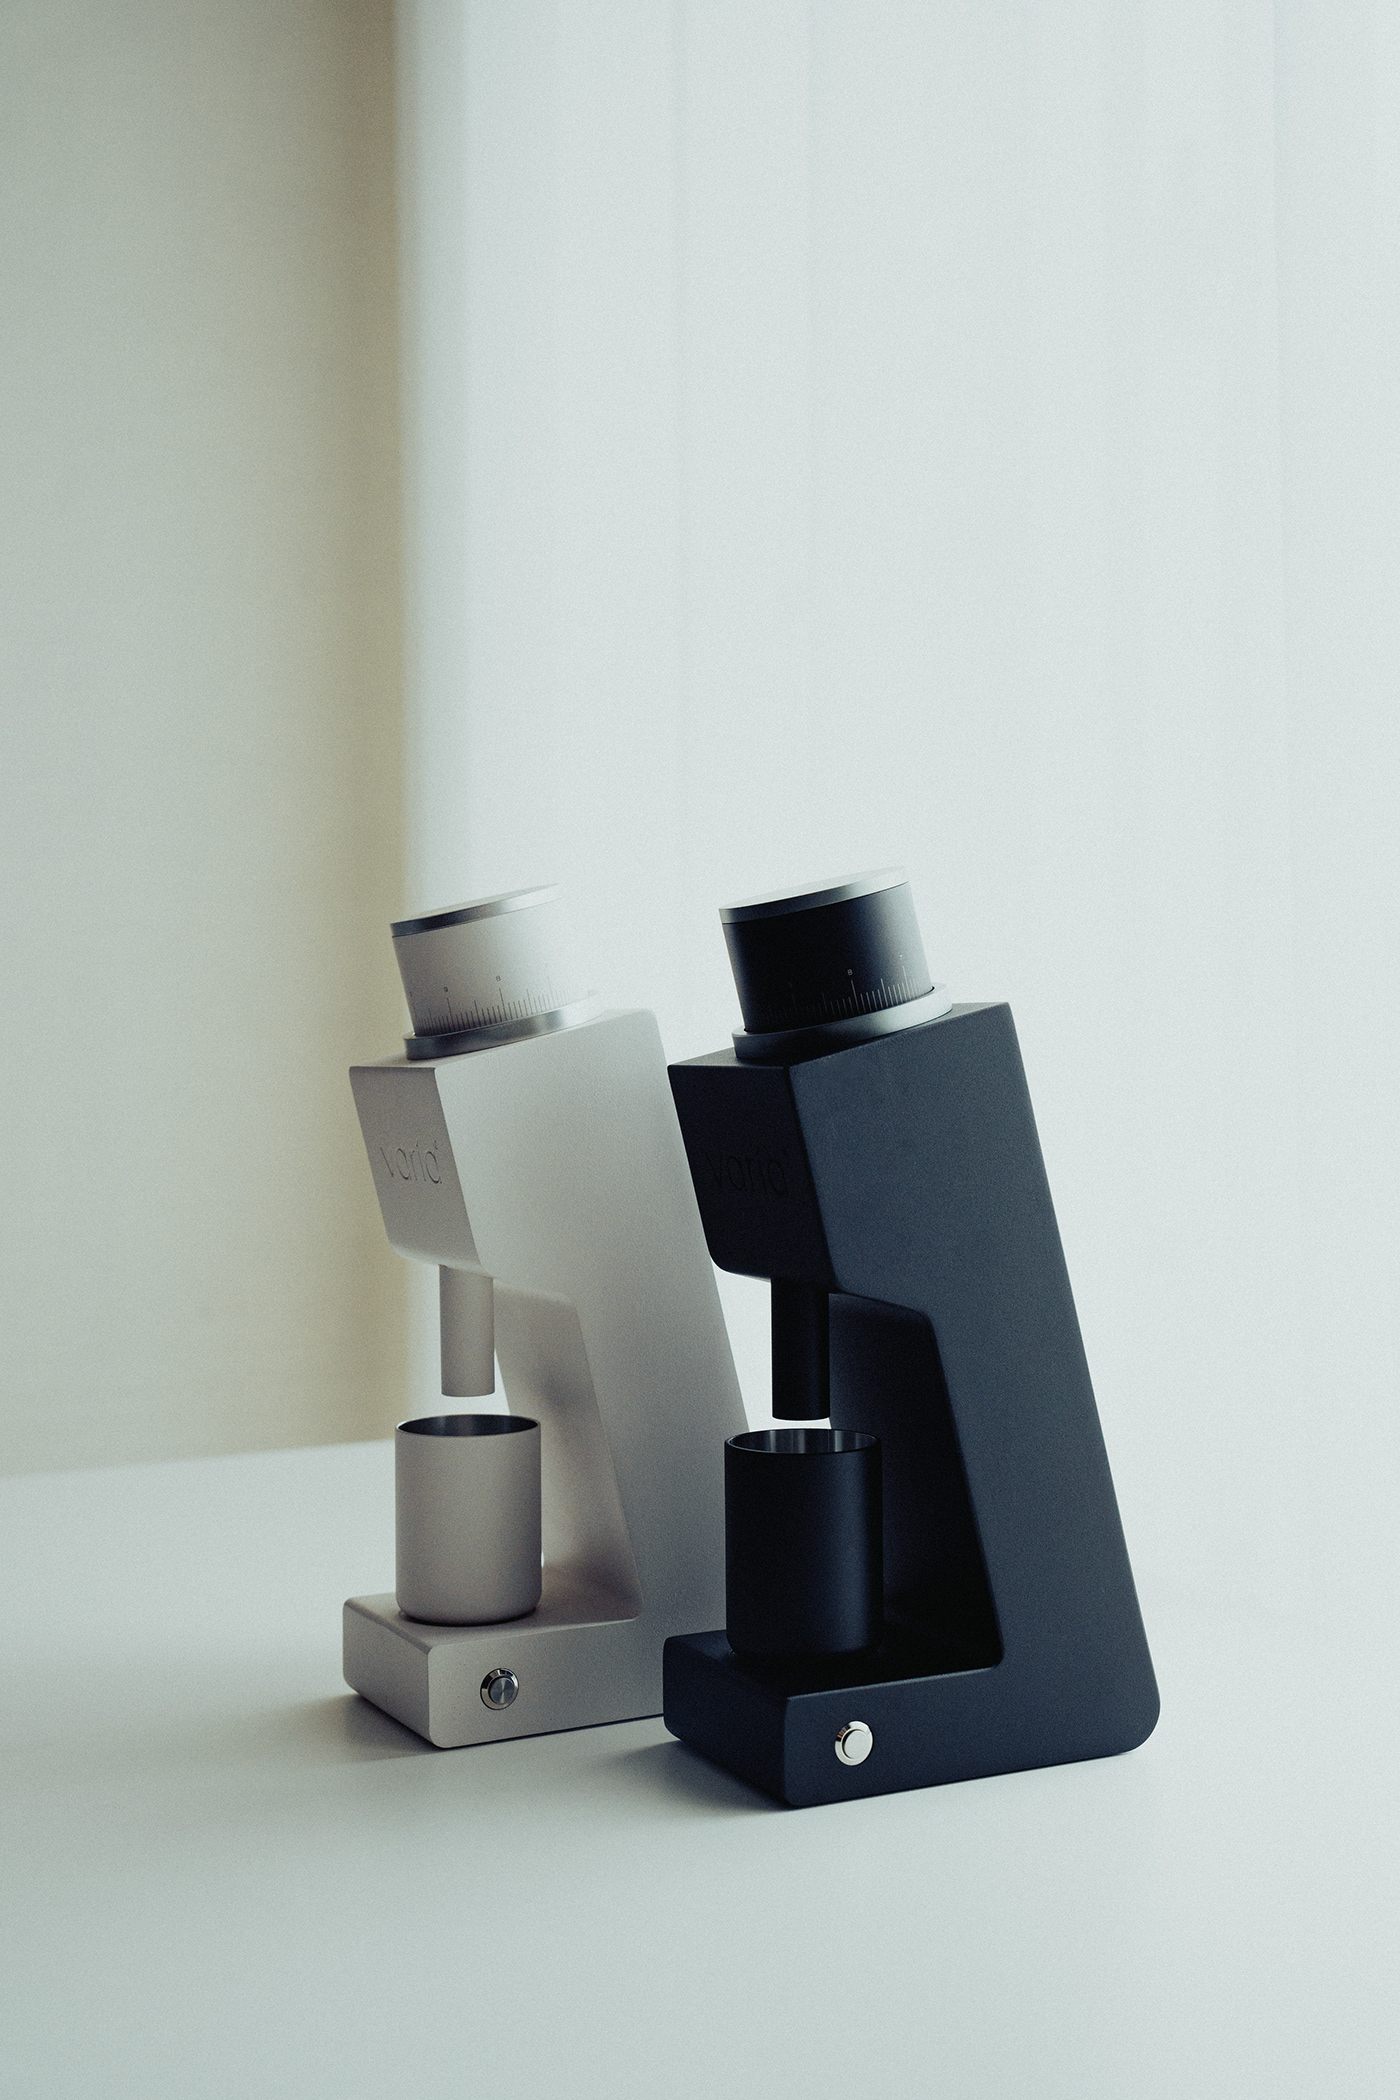 Coffee grinder product design  Photography 